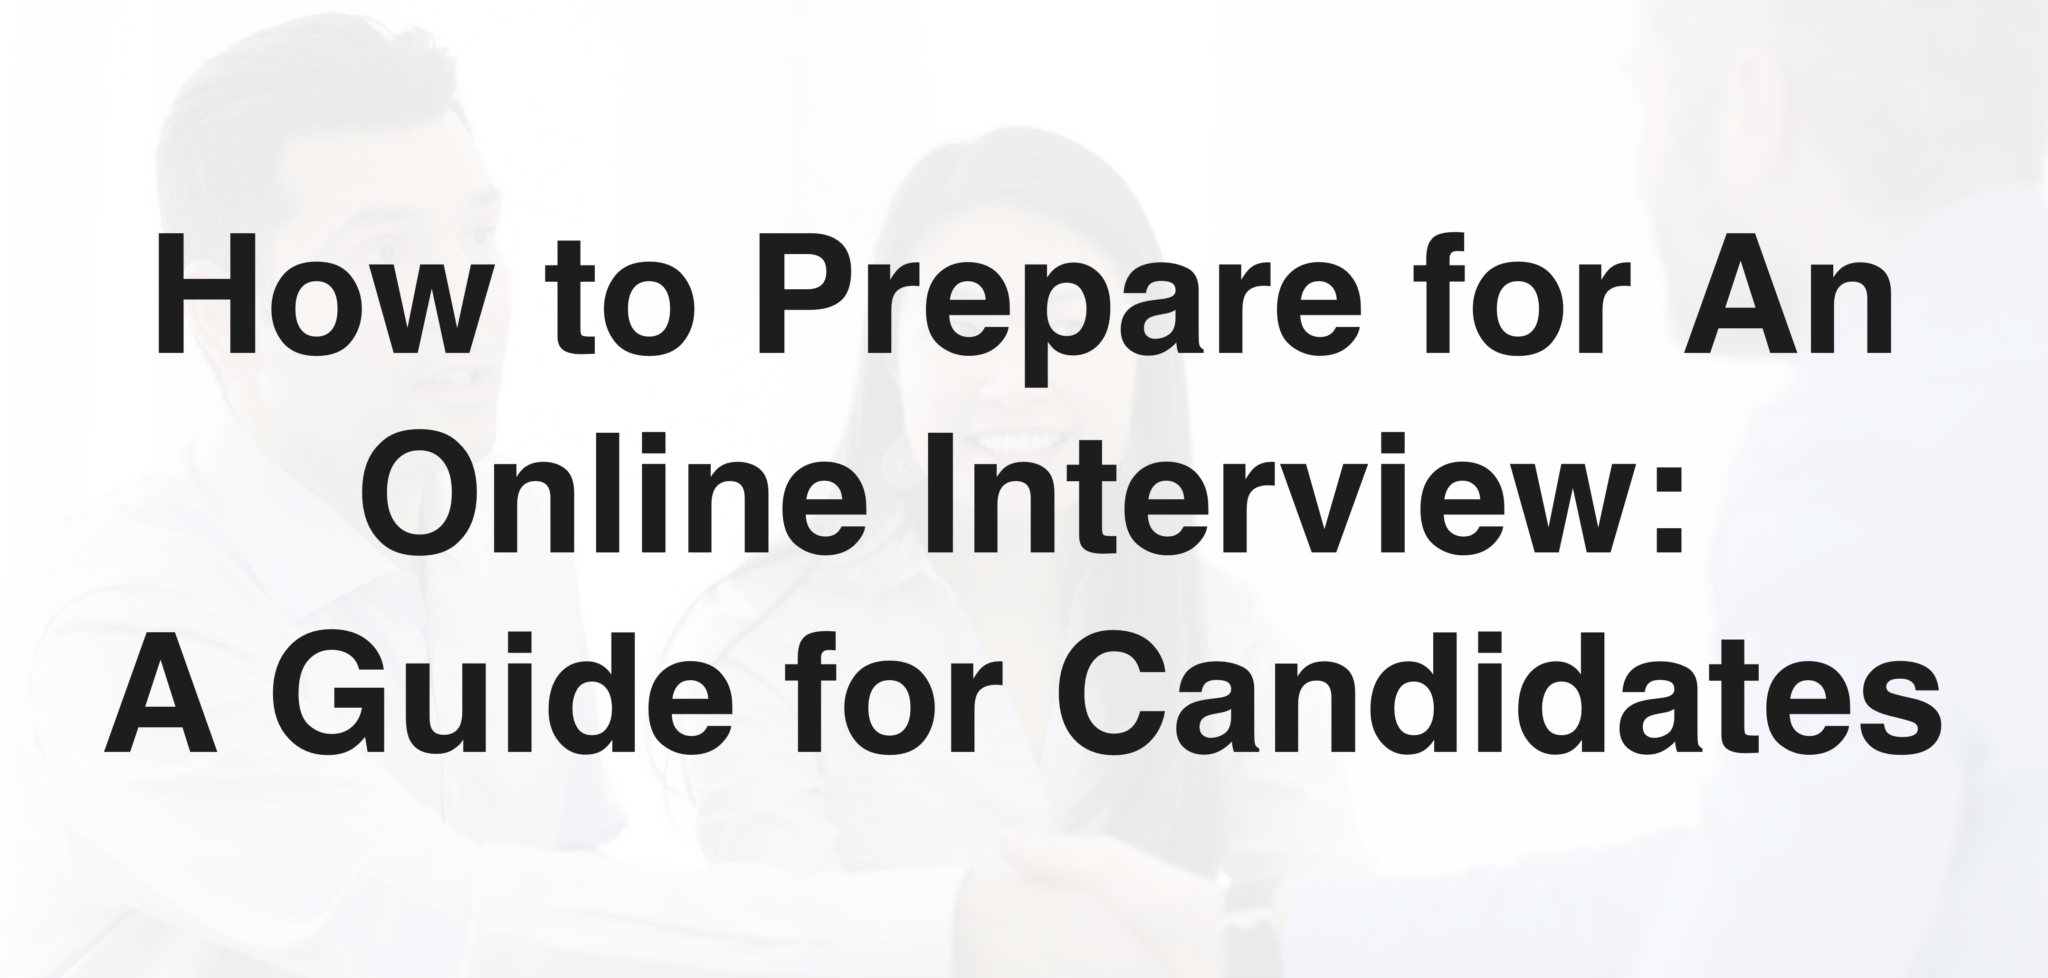 How to Prepare for An Online Interview